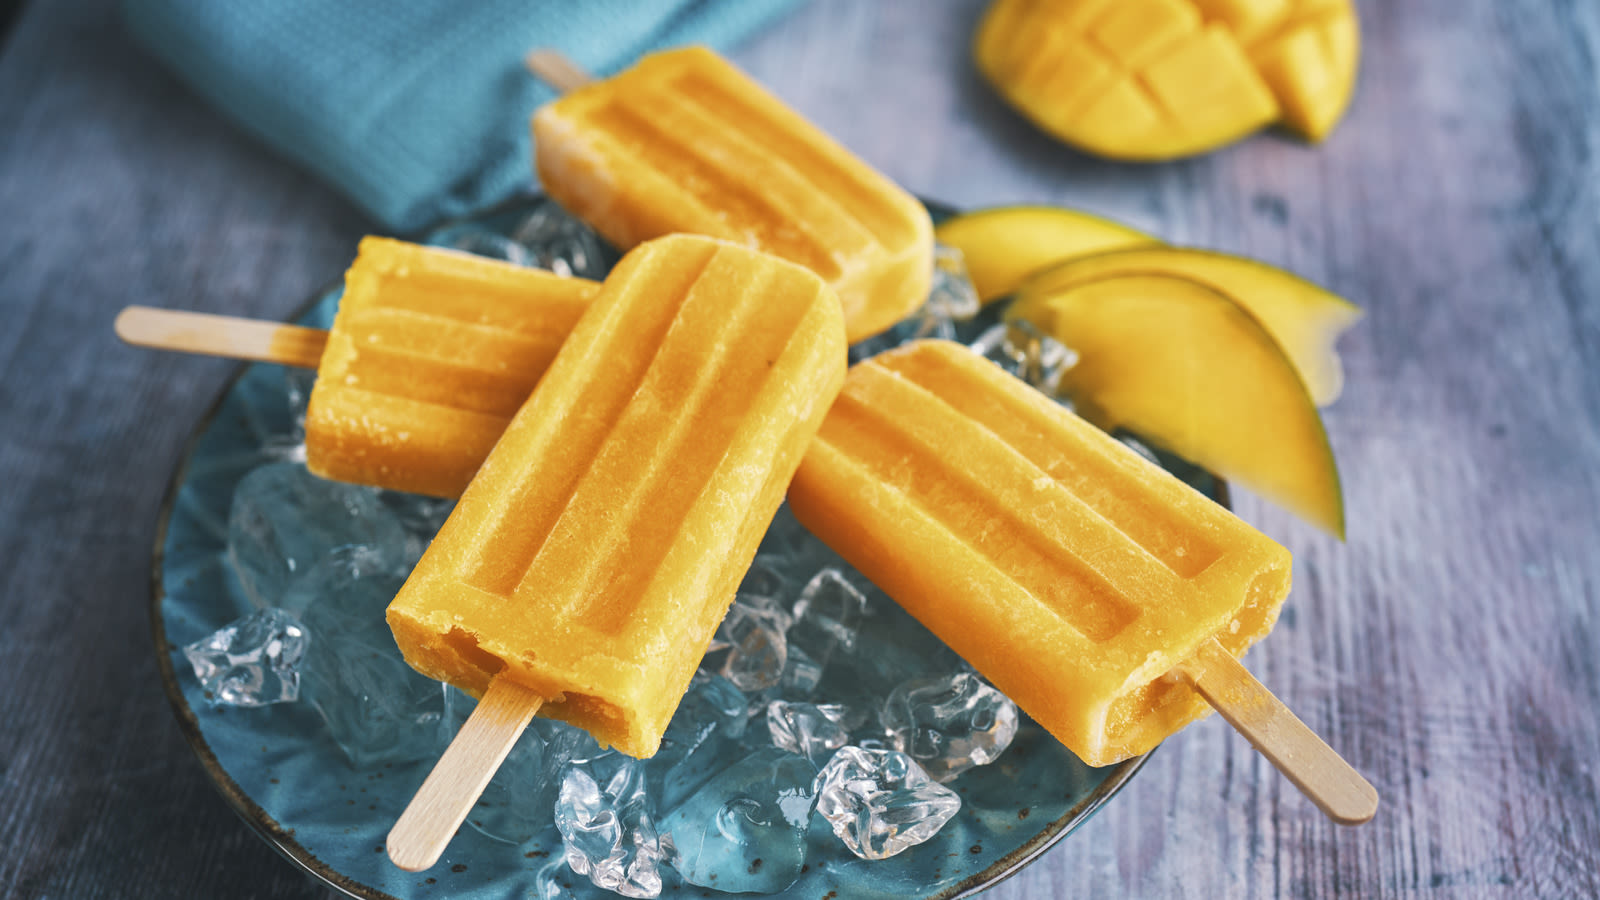 How To Store Homemade Popsicles And Prevent Freezer Burn